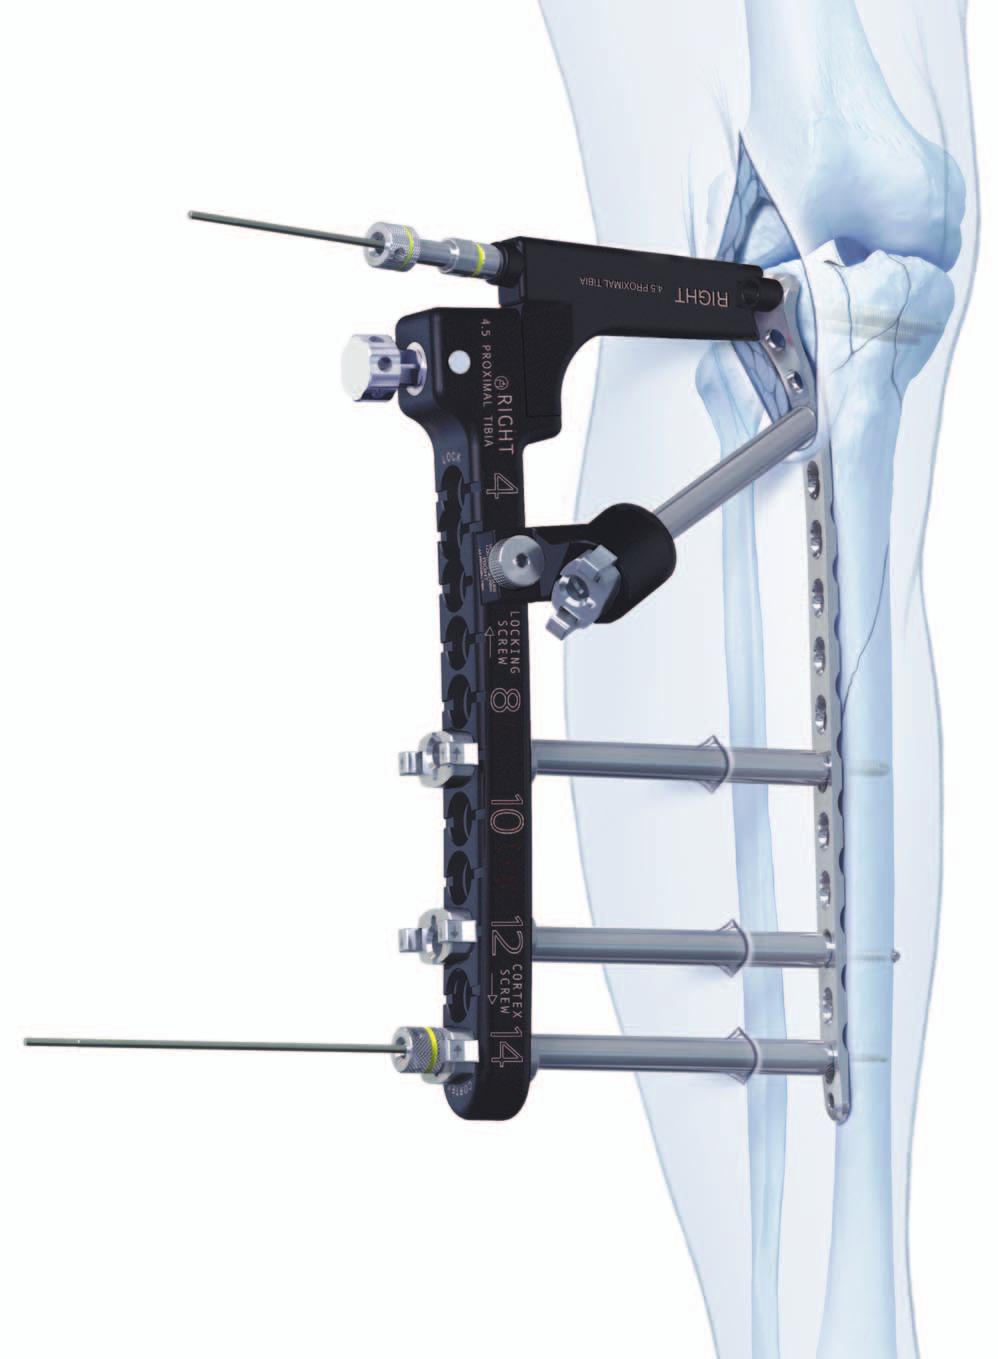 Periarticular Aiming Arm Instruments for LCP Proximal Tibial Plate 4.5/5.0. Part of the LCP Periarticular Aiming Arm Instrument System (large).